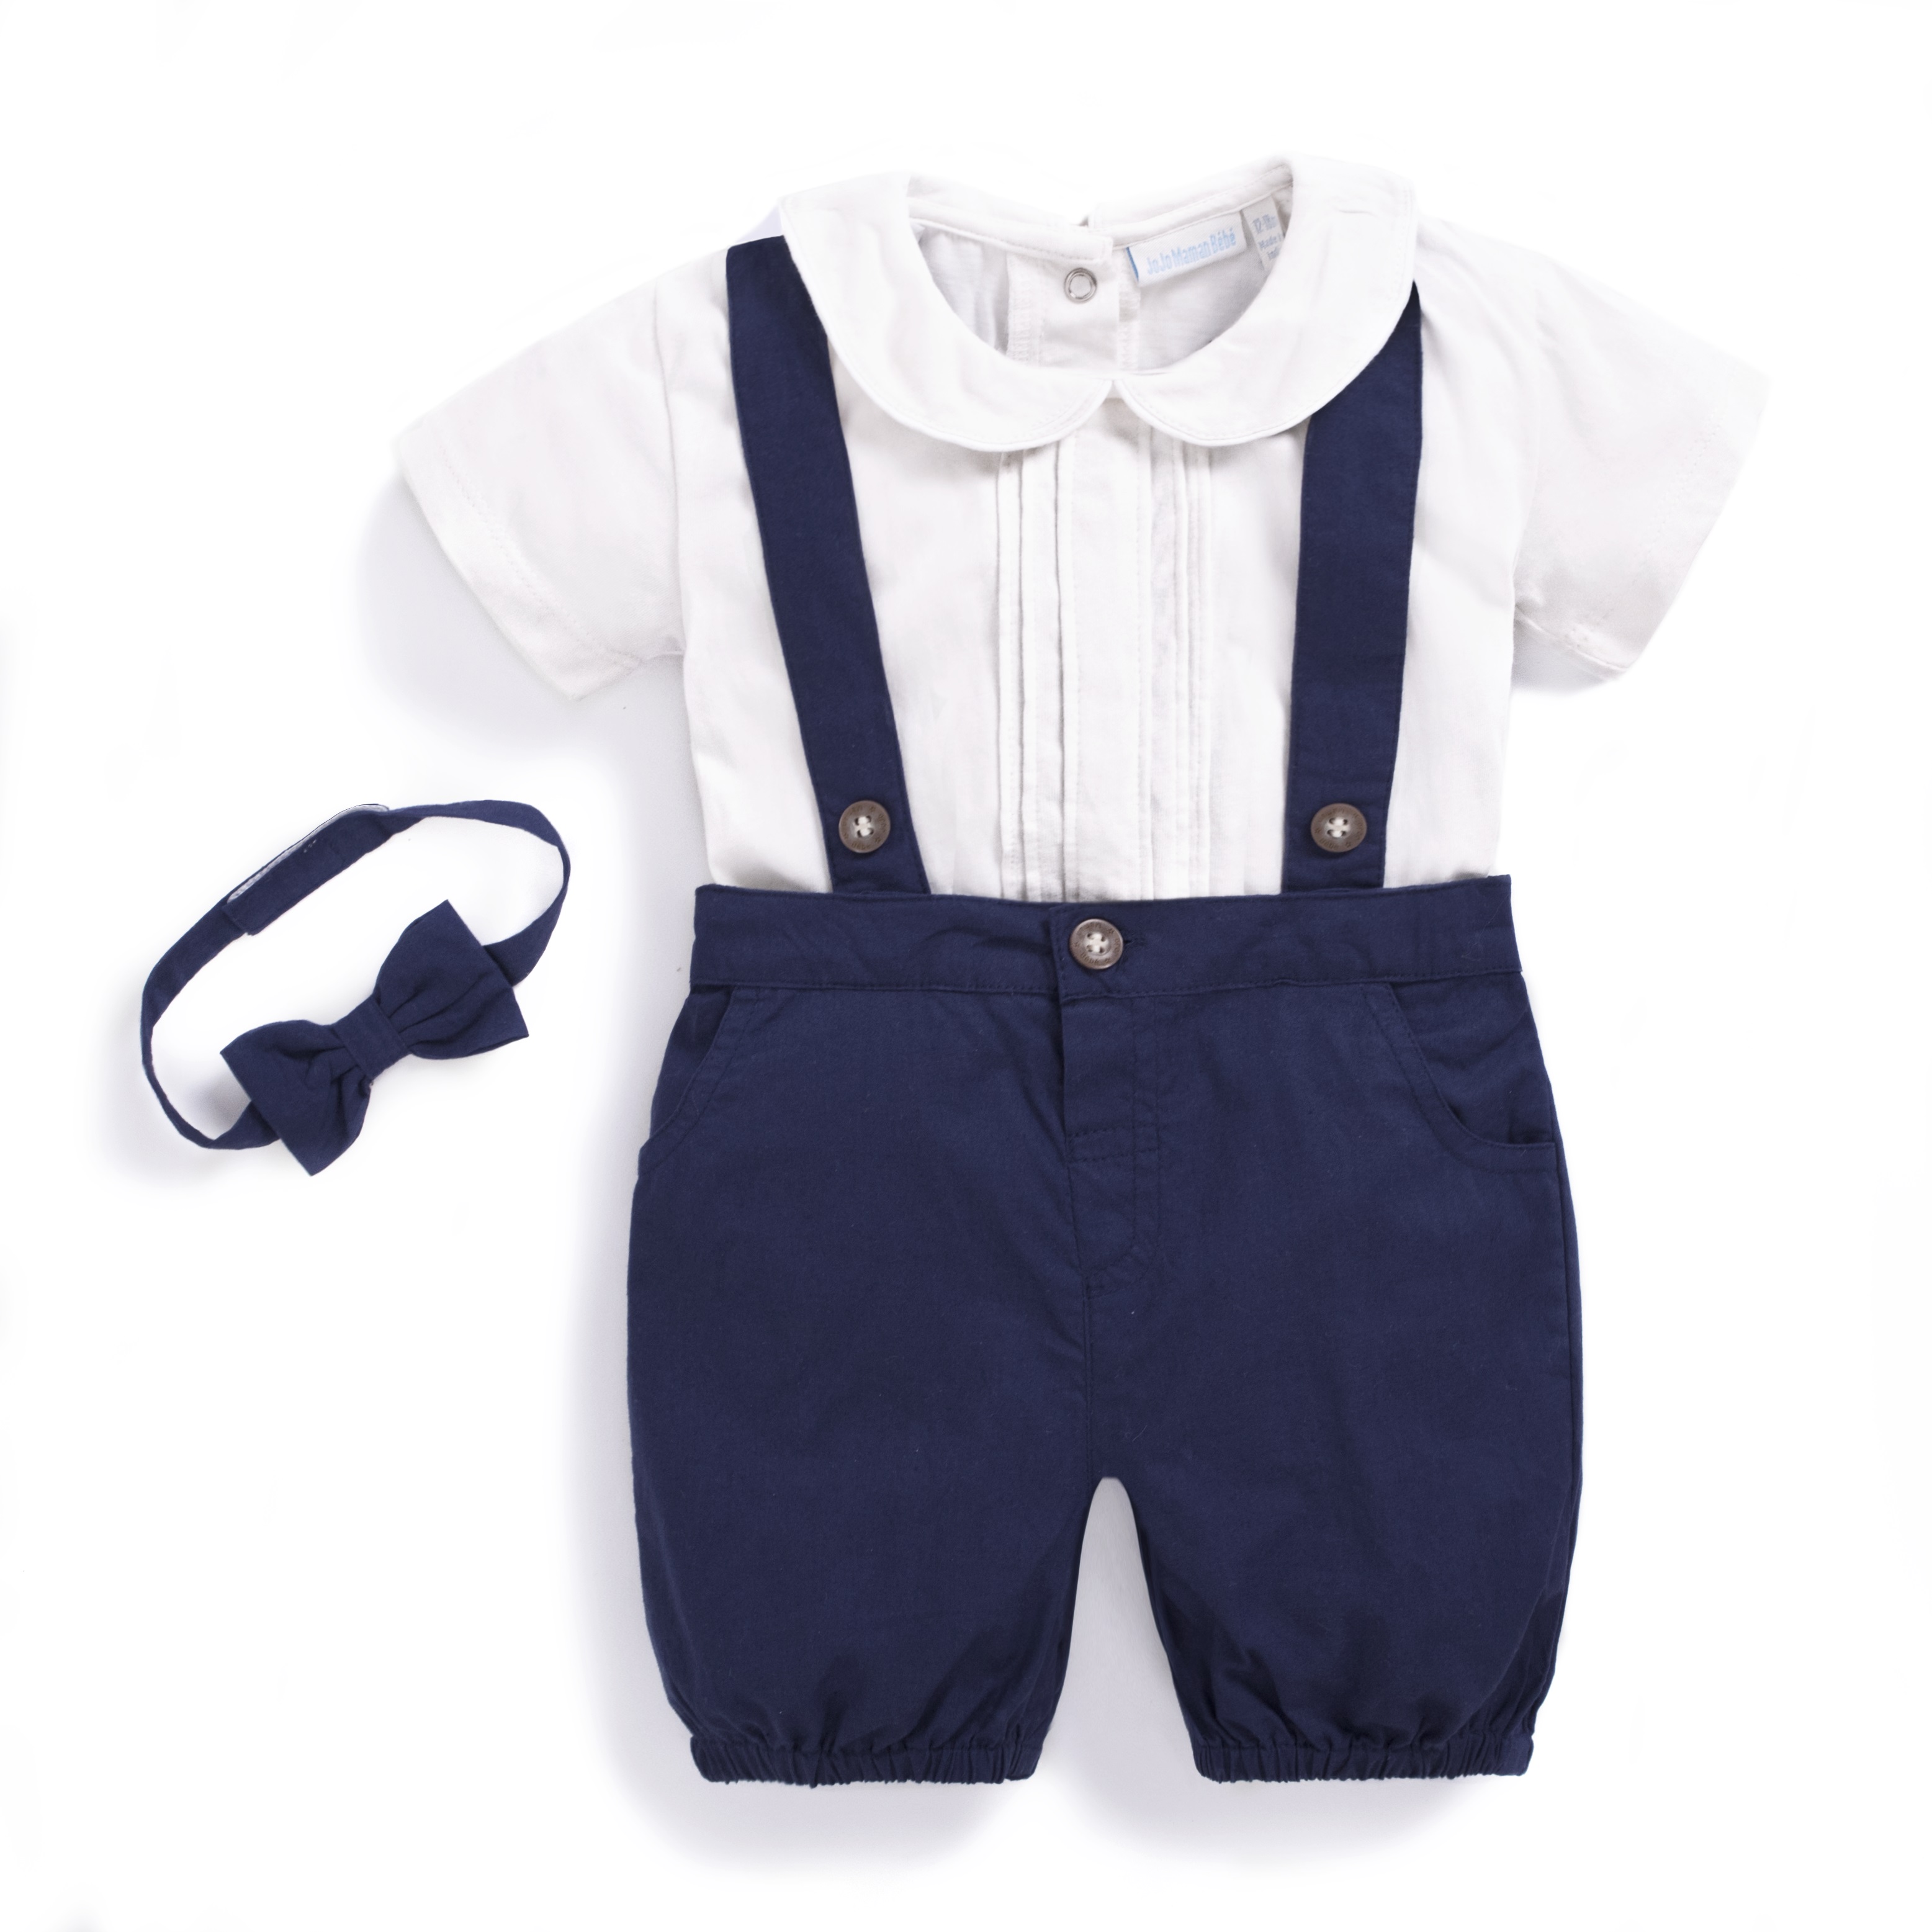 These Adorable Newborn Outfits Are Perfect For A Little Prince